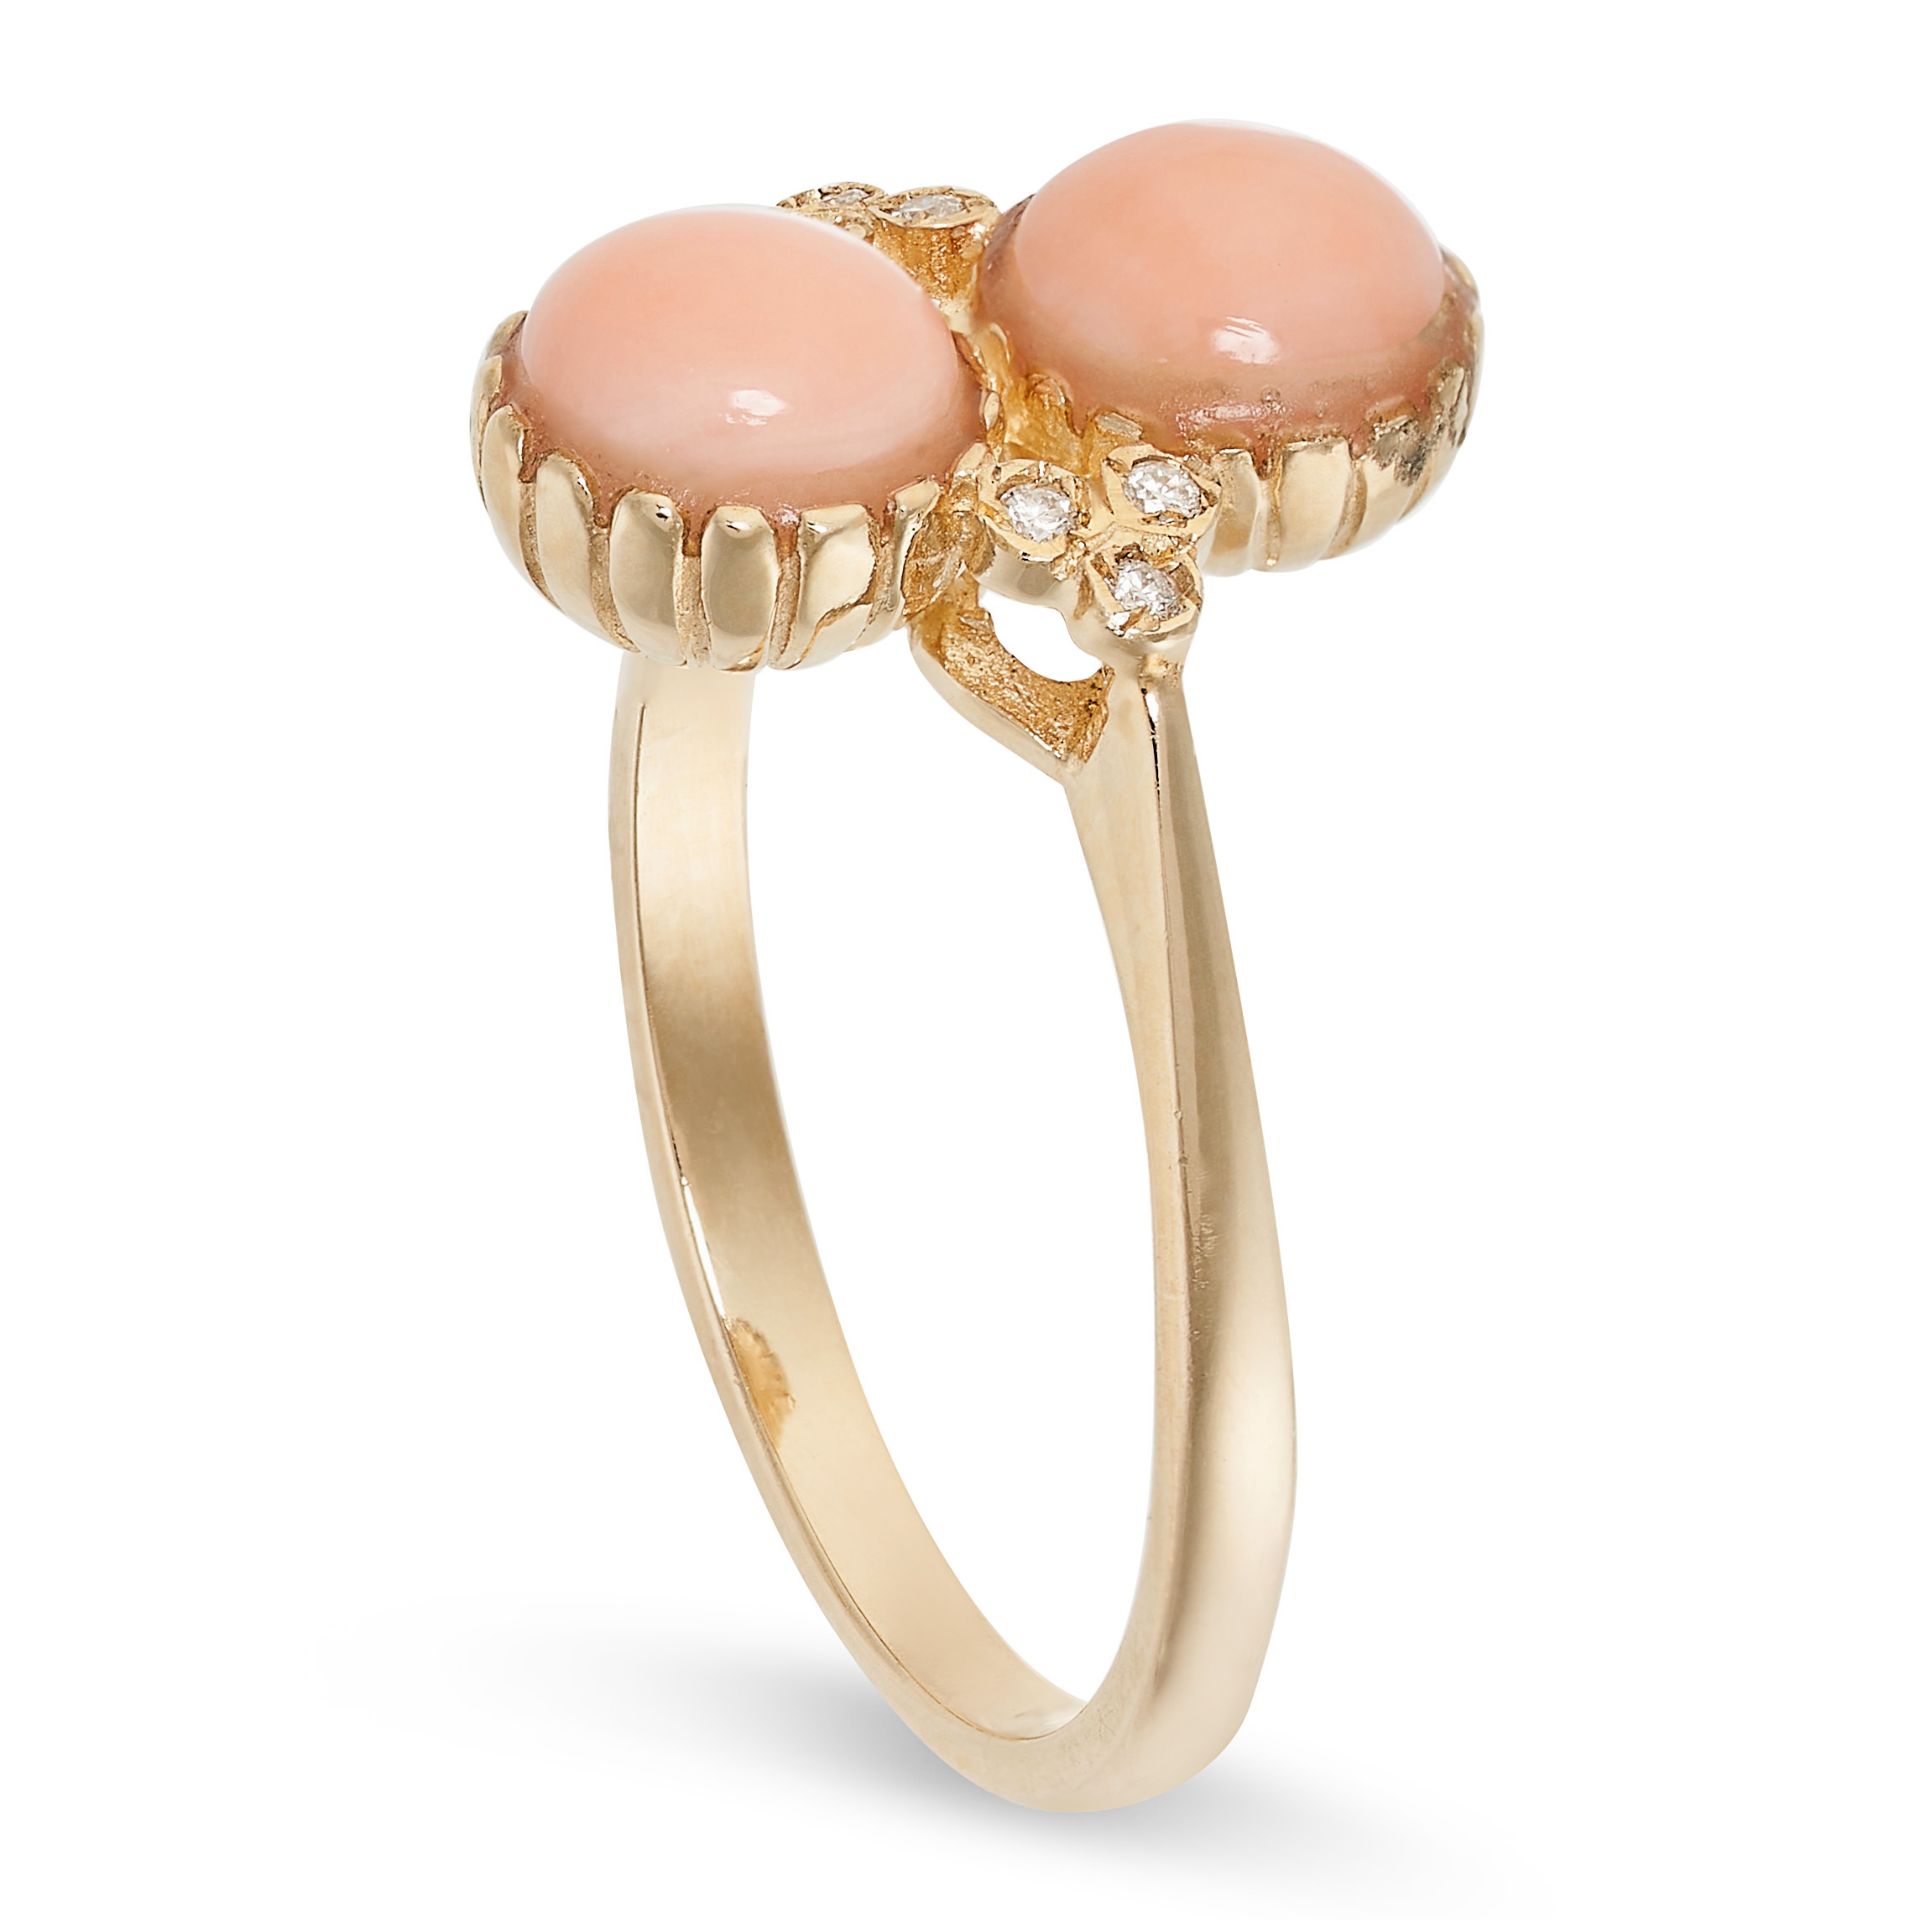 A CORAL AND DIAMOND RING in 9ct gold, set with two round polished pieces of pink coral, accented - Bild 2 aus 2